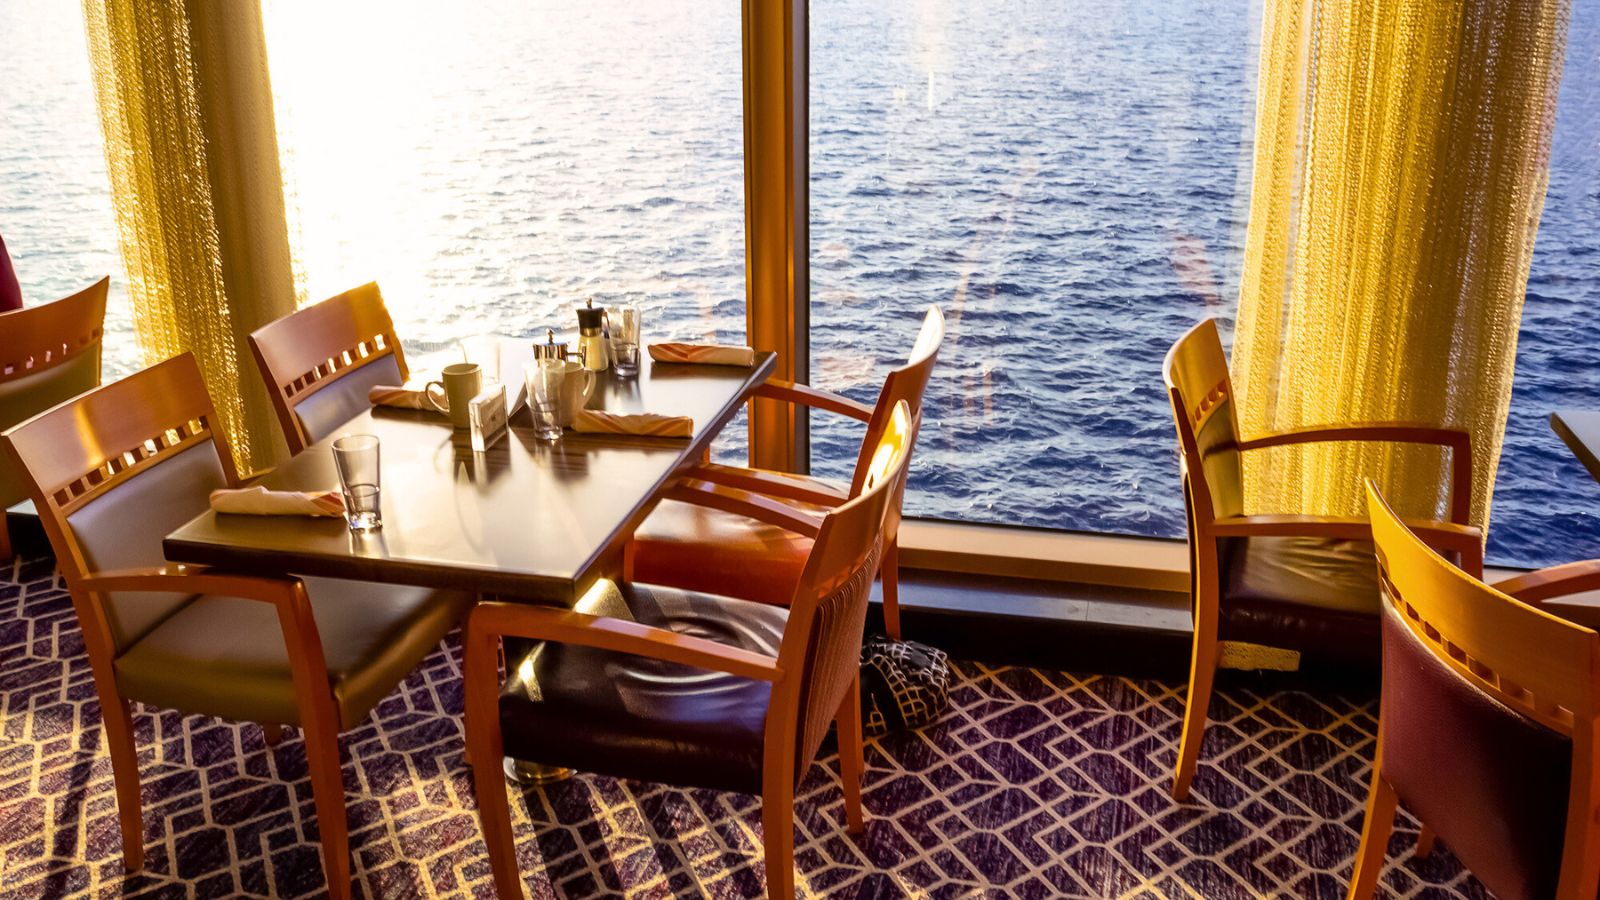 <p>Let’s fast-forward and imagine that you’re now on the cruise. Being smart with your spending on board will help you offset the cost of the ticket. A few ways to save money include sticking to the free drinks instead of buying soda, avoiding the bar as much as possible, and steering clear of the fancy restaurants.</p><p>Likewise, check the rules first, but some cruise companies let you bring non-perishable food and drinks aboard. Stocking up at the store beforehand could be a financial lifeline on the cruise itself.  </p>